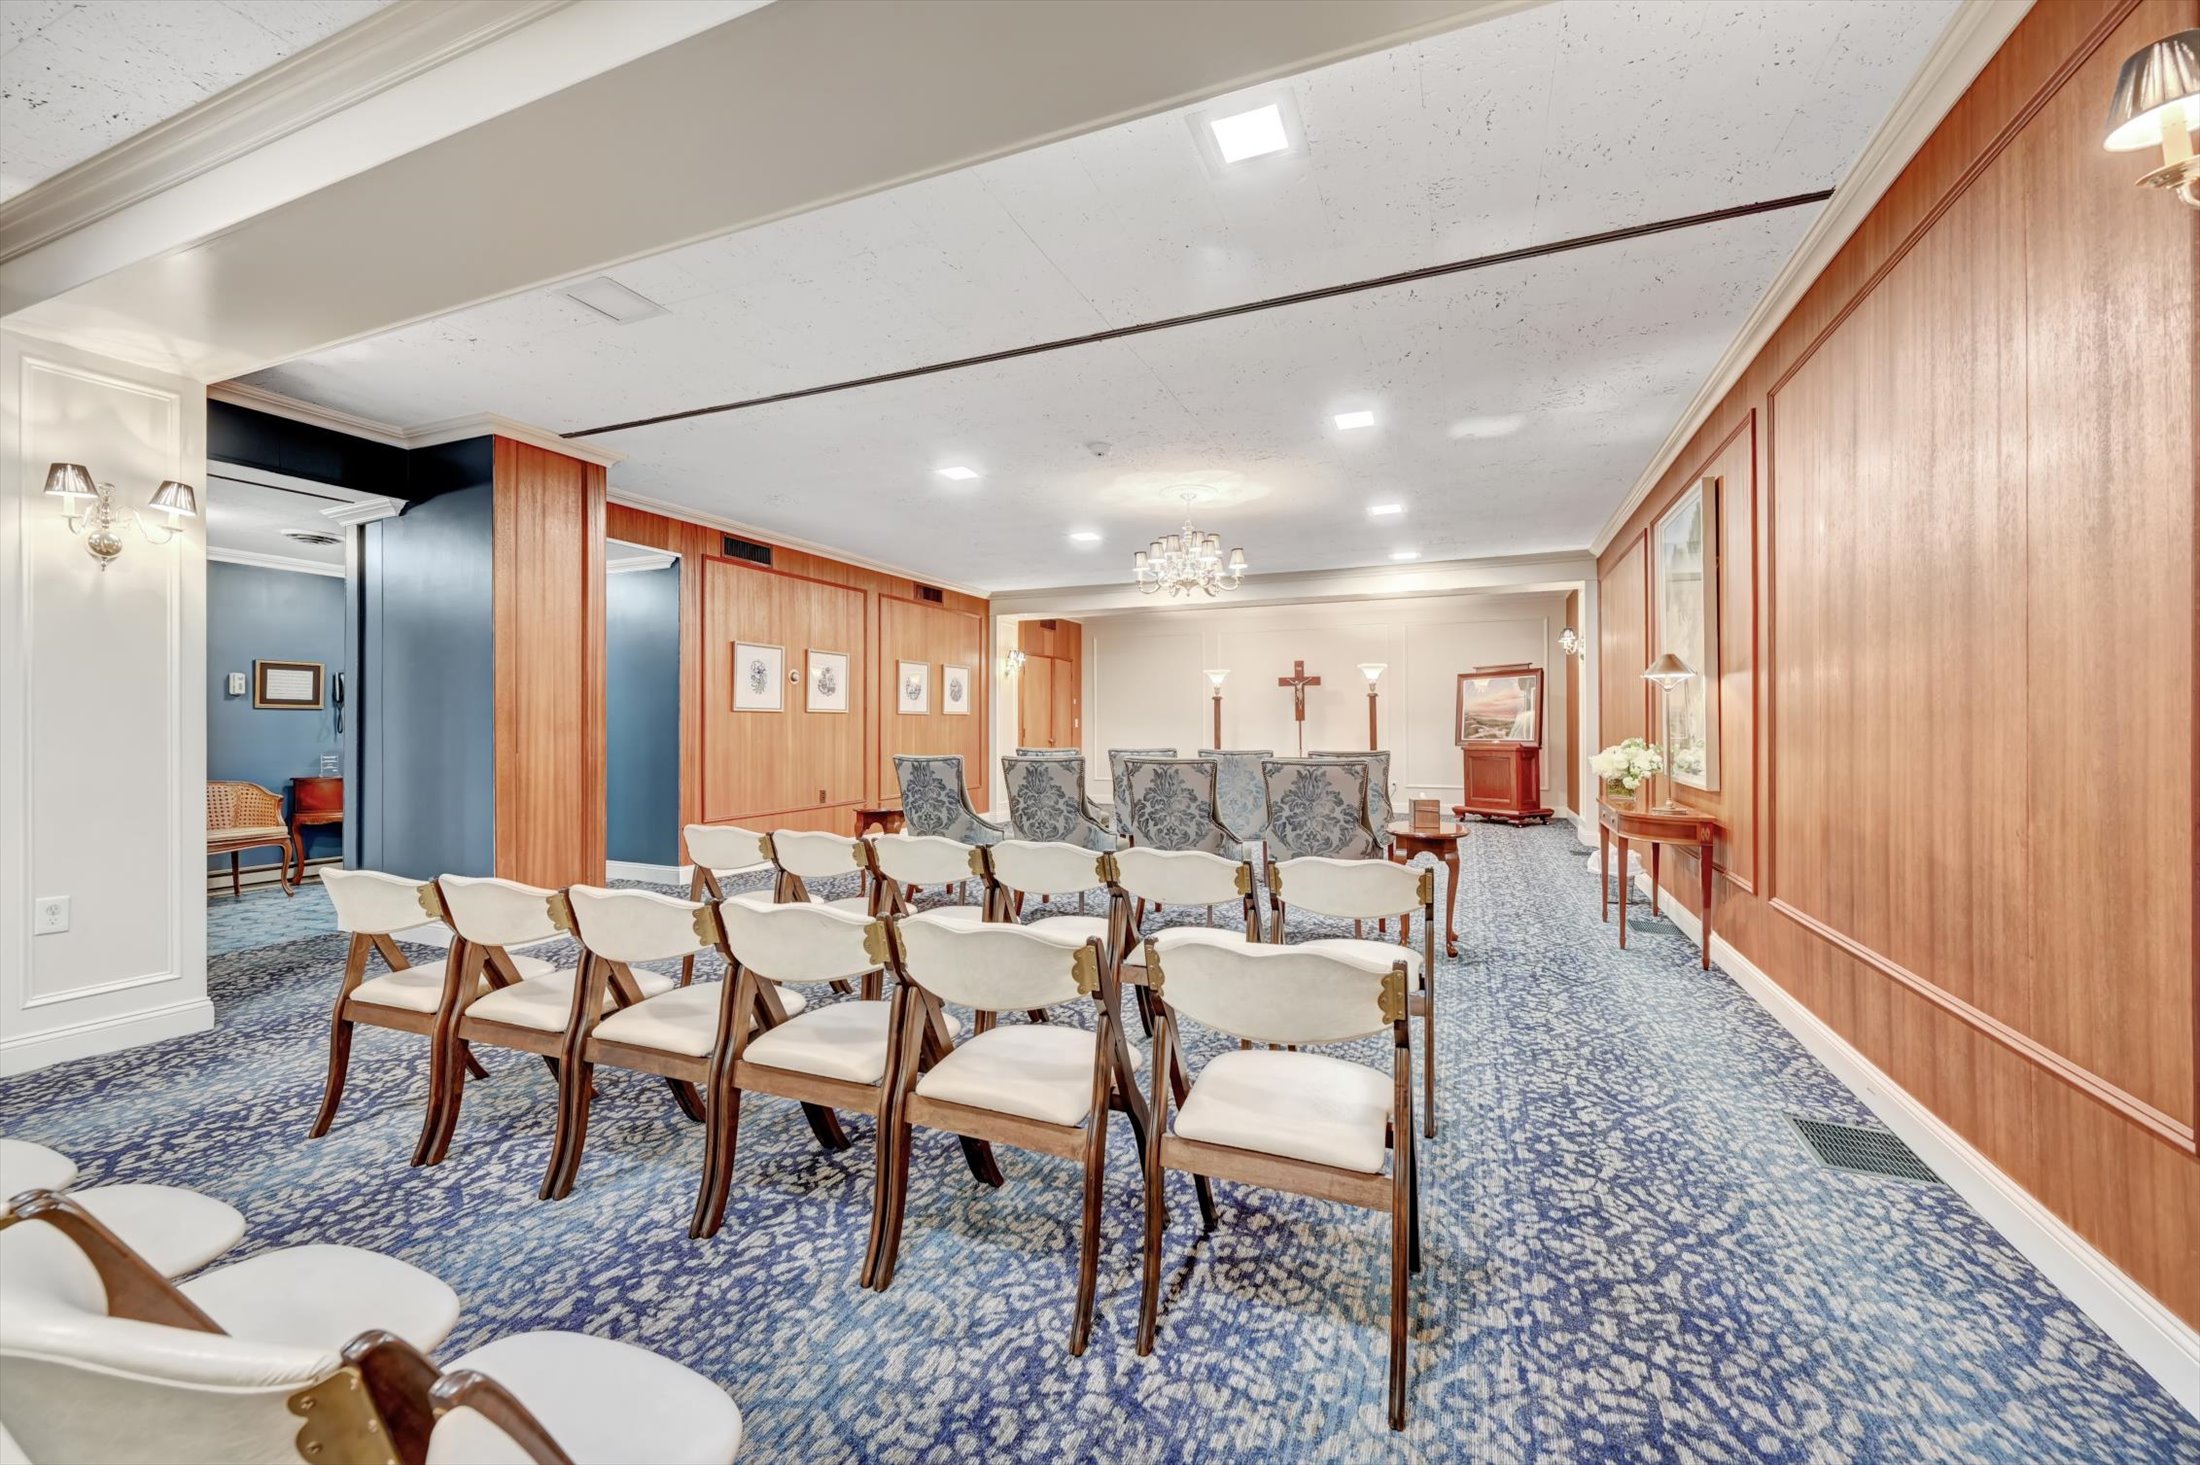 Chapel at
Woolley-Boglioli Funeral Home
10 Morrell St
Long Branch, NJ 07740